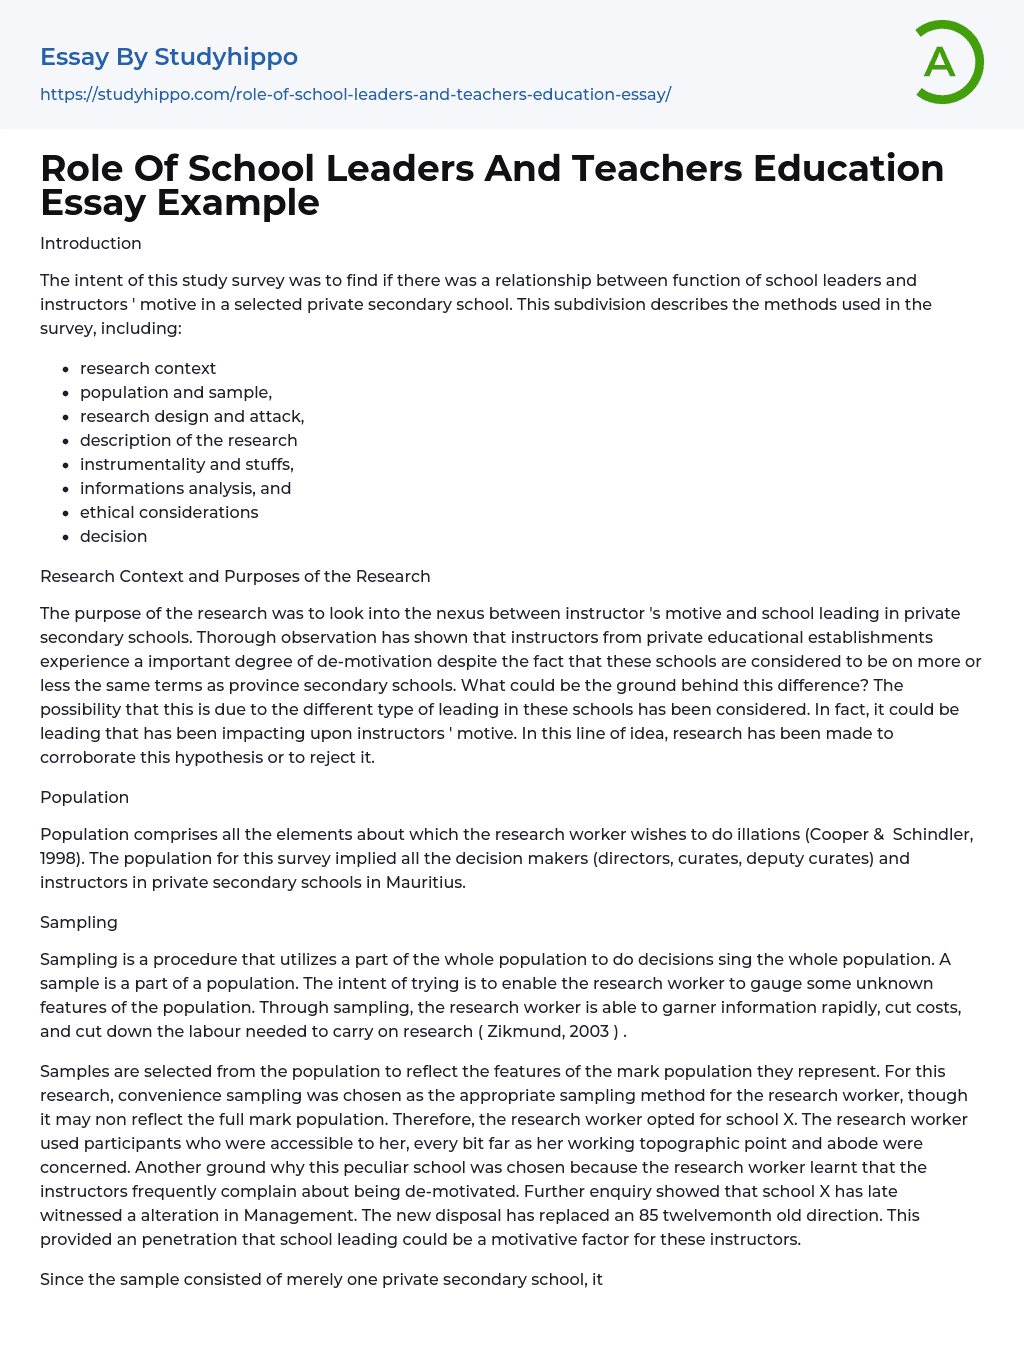 Role Of School Leaders And Teachers Education Essay Example